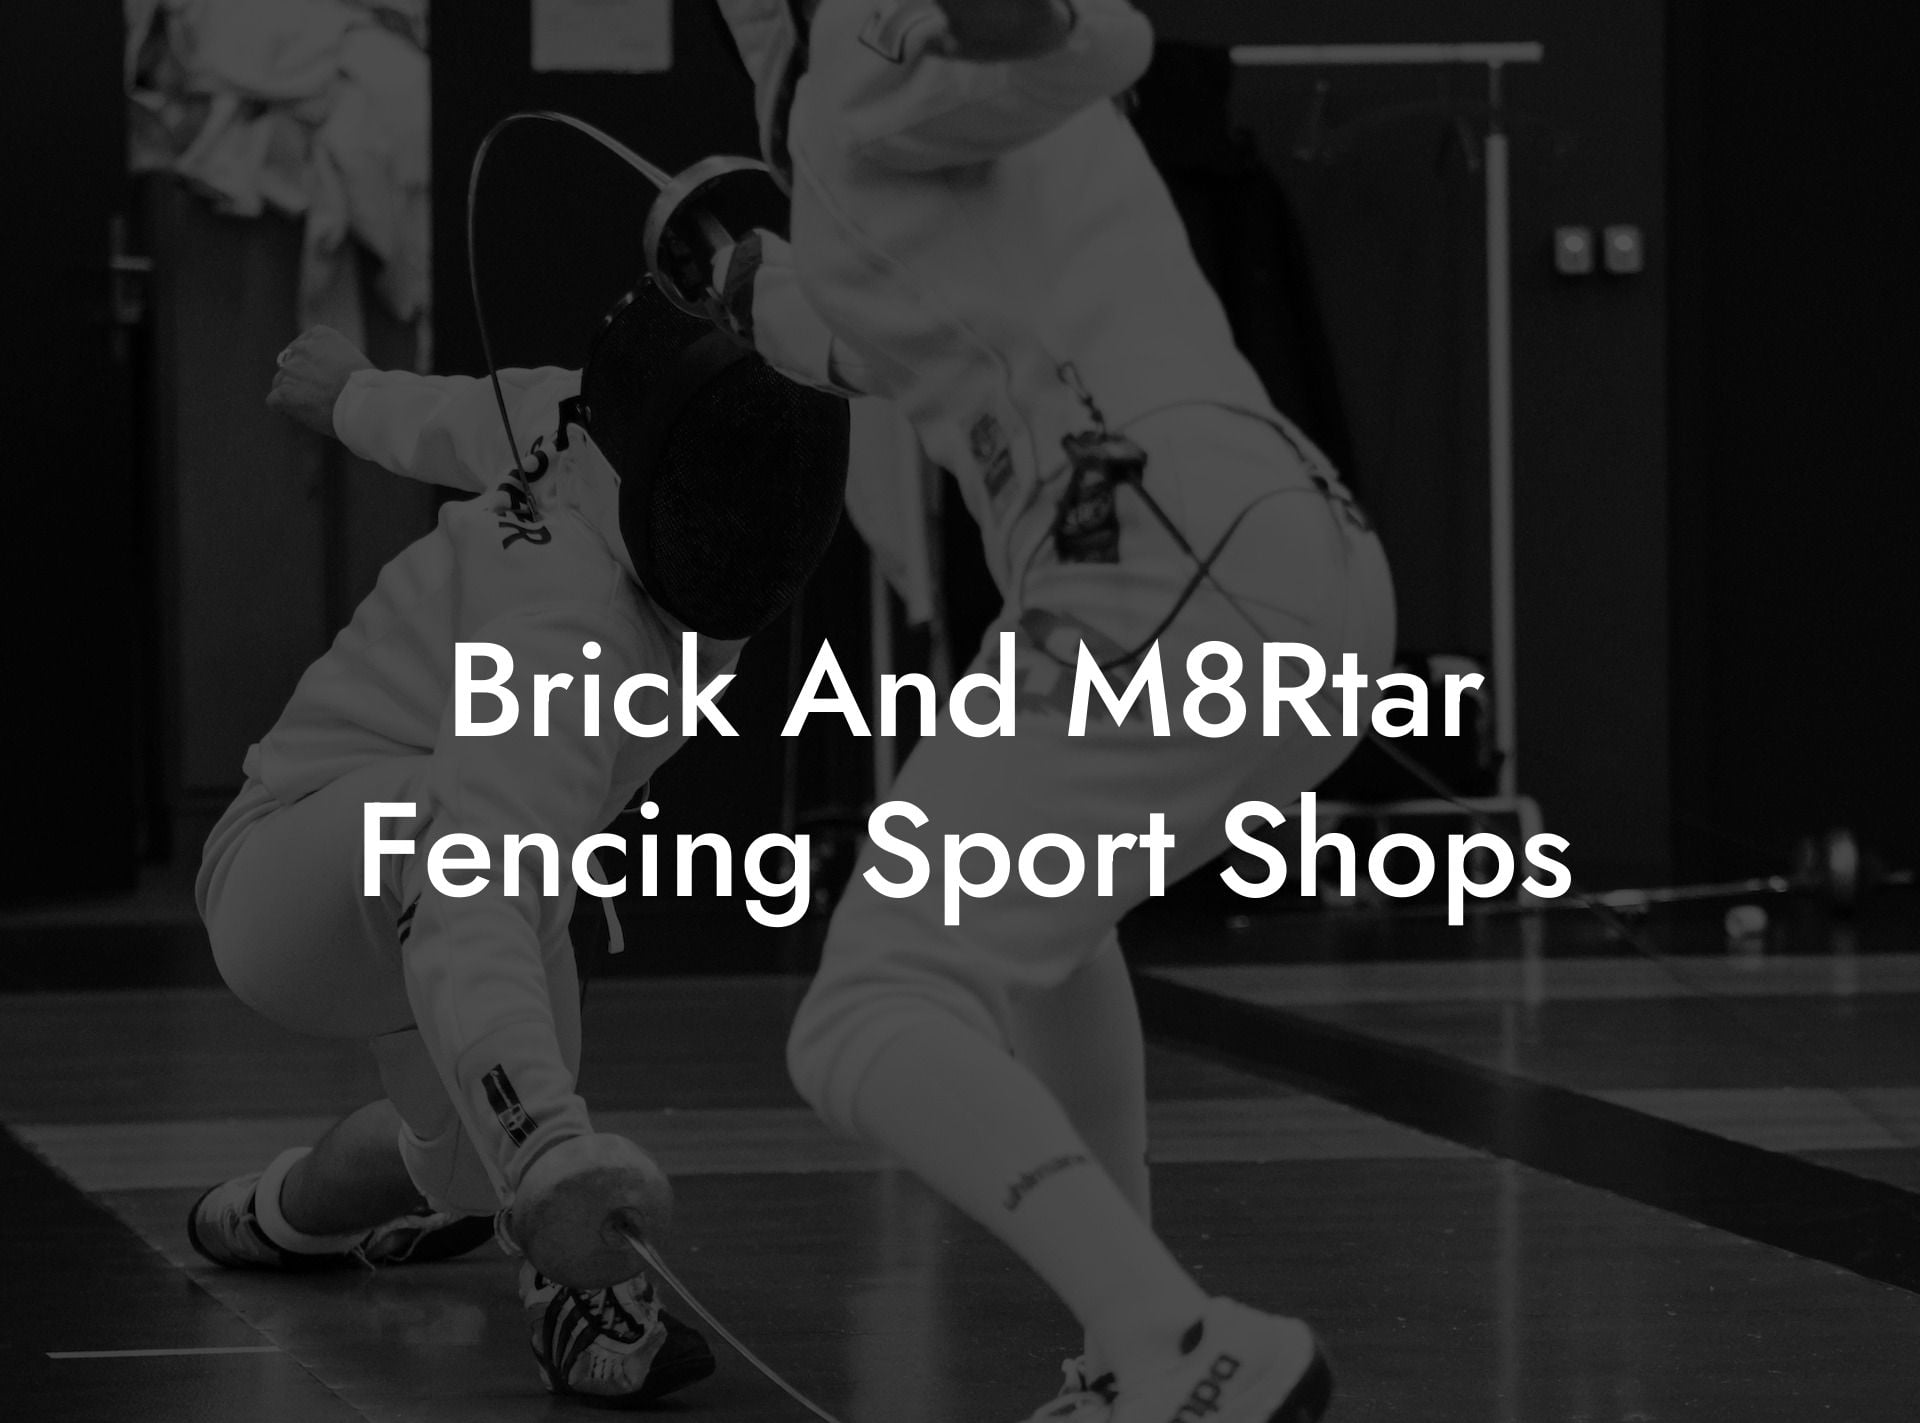 Brick And M8Rtar Fencing Sport Shops